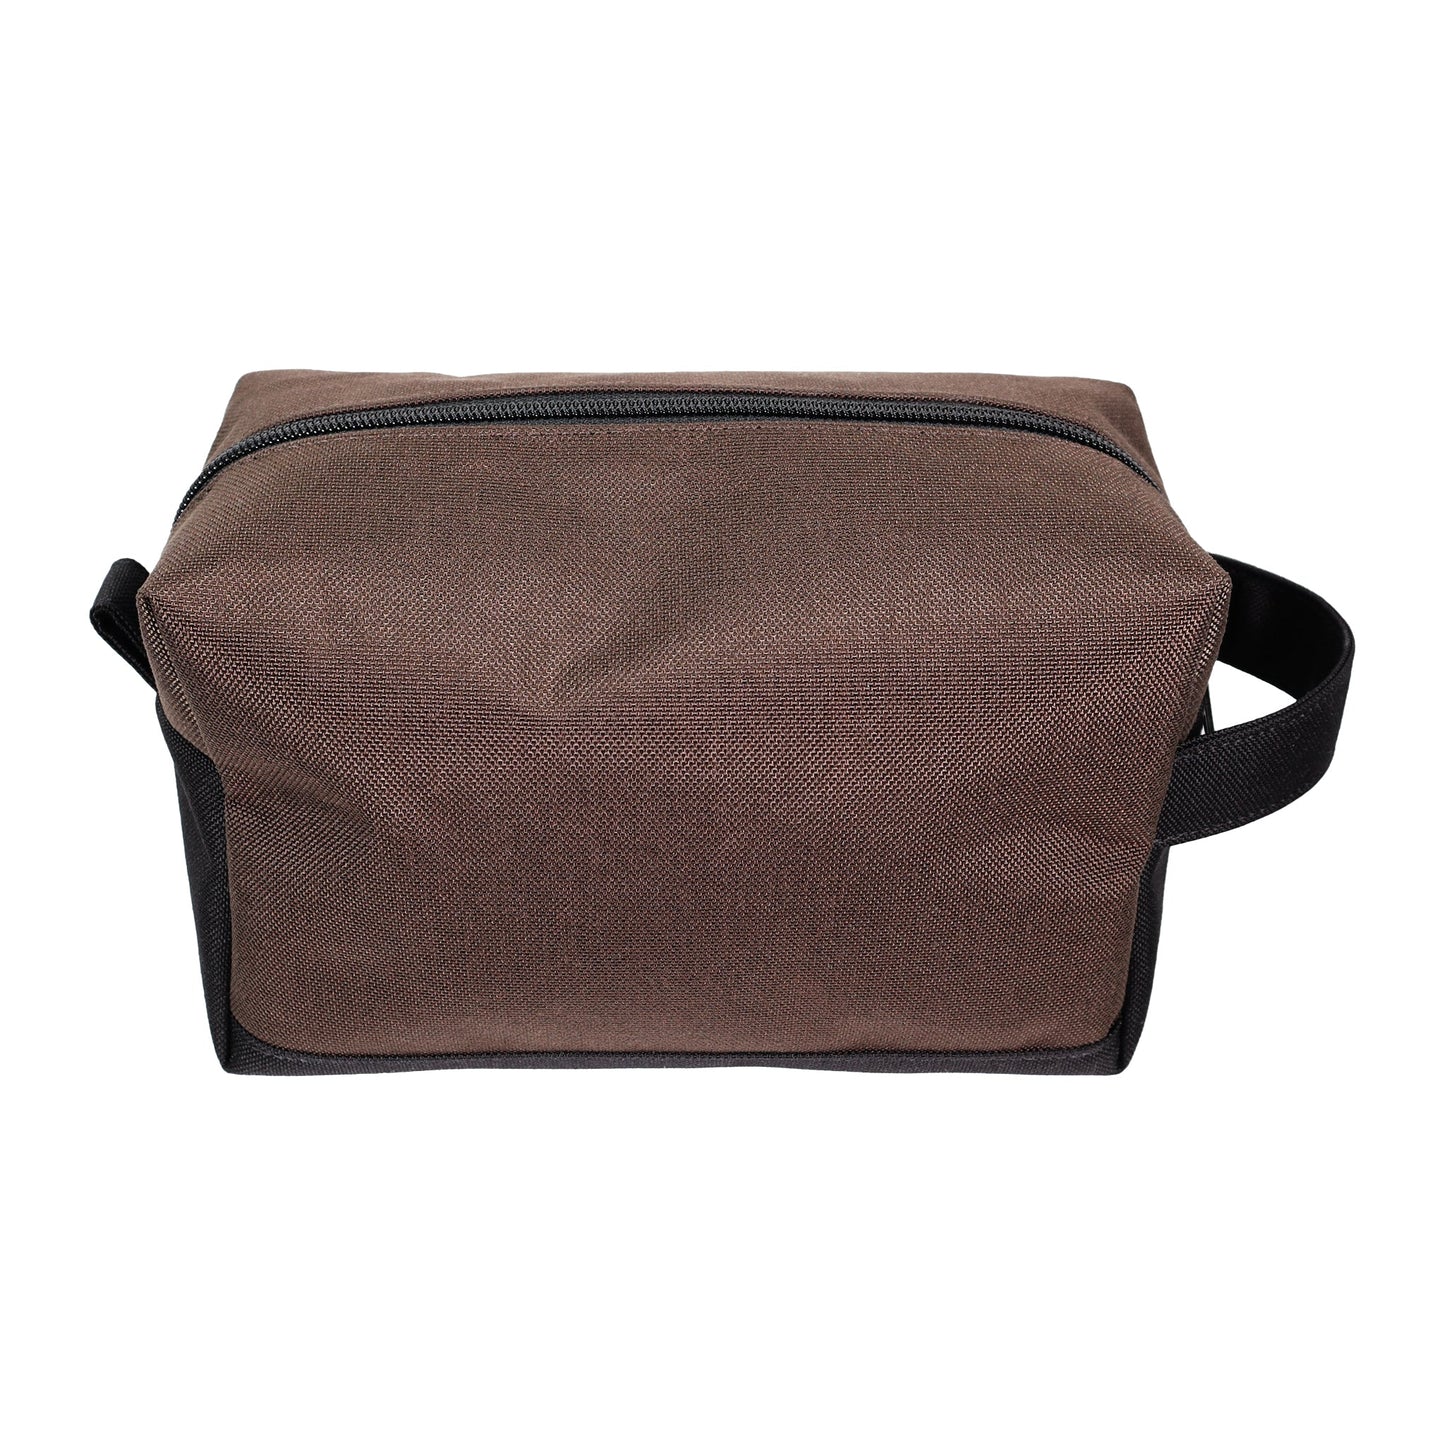 Brown and Black Tall Canvas Toiletry Bag